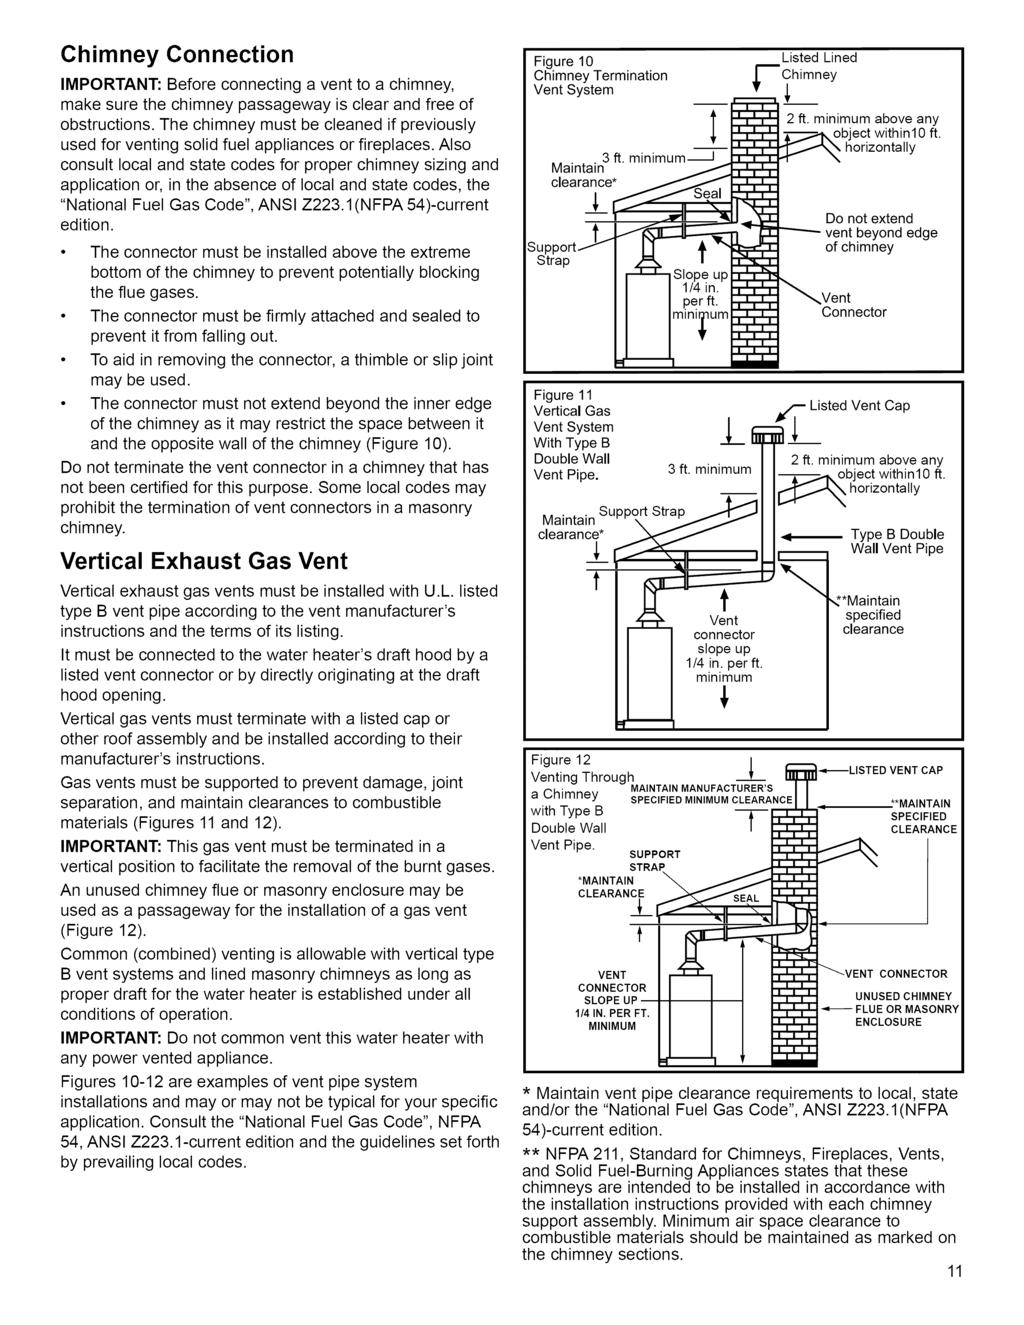 Chimney Connection IMPORTANT: Before connecting a vent to a chimney, make sure the chimney passageway is clear and free of obstructions.